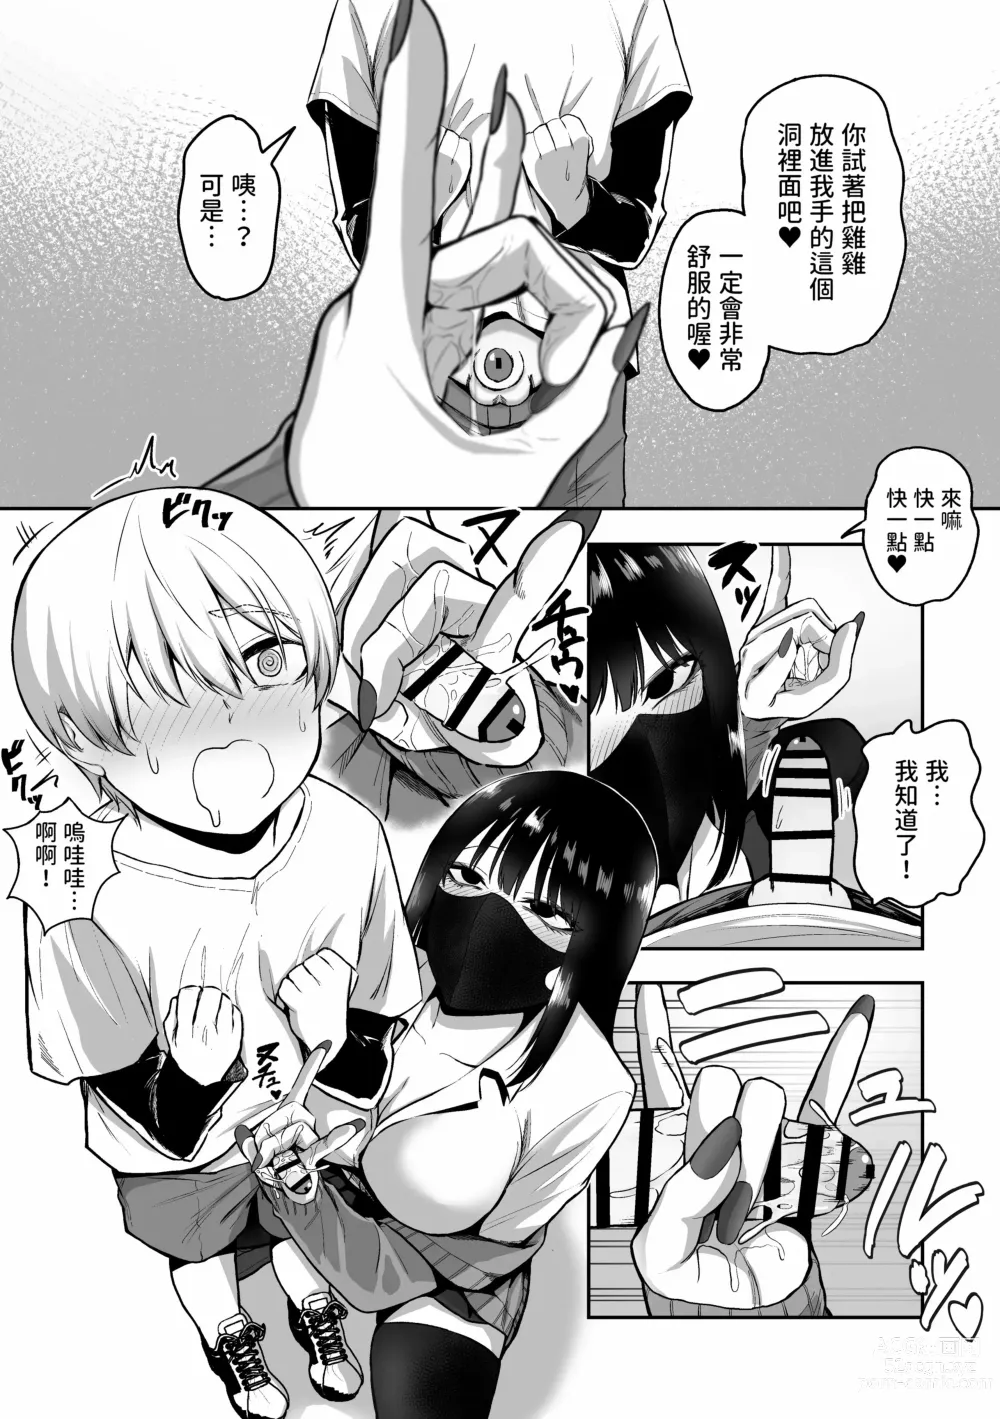 Page 8 of doujinshi 三食纳豆辣妹